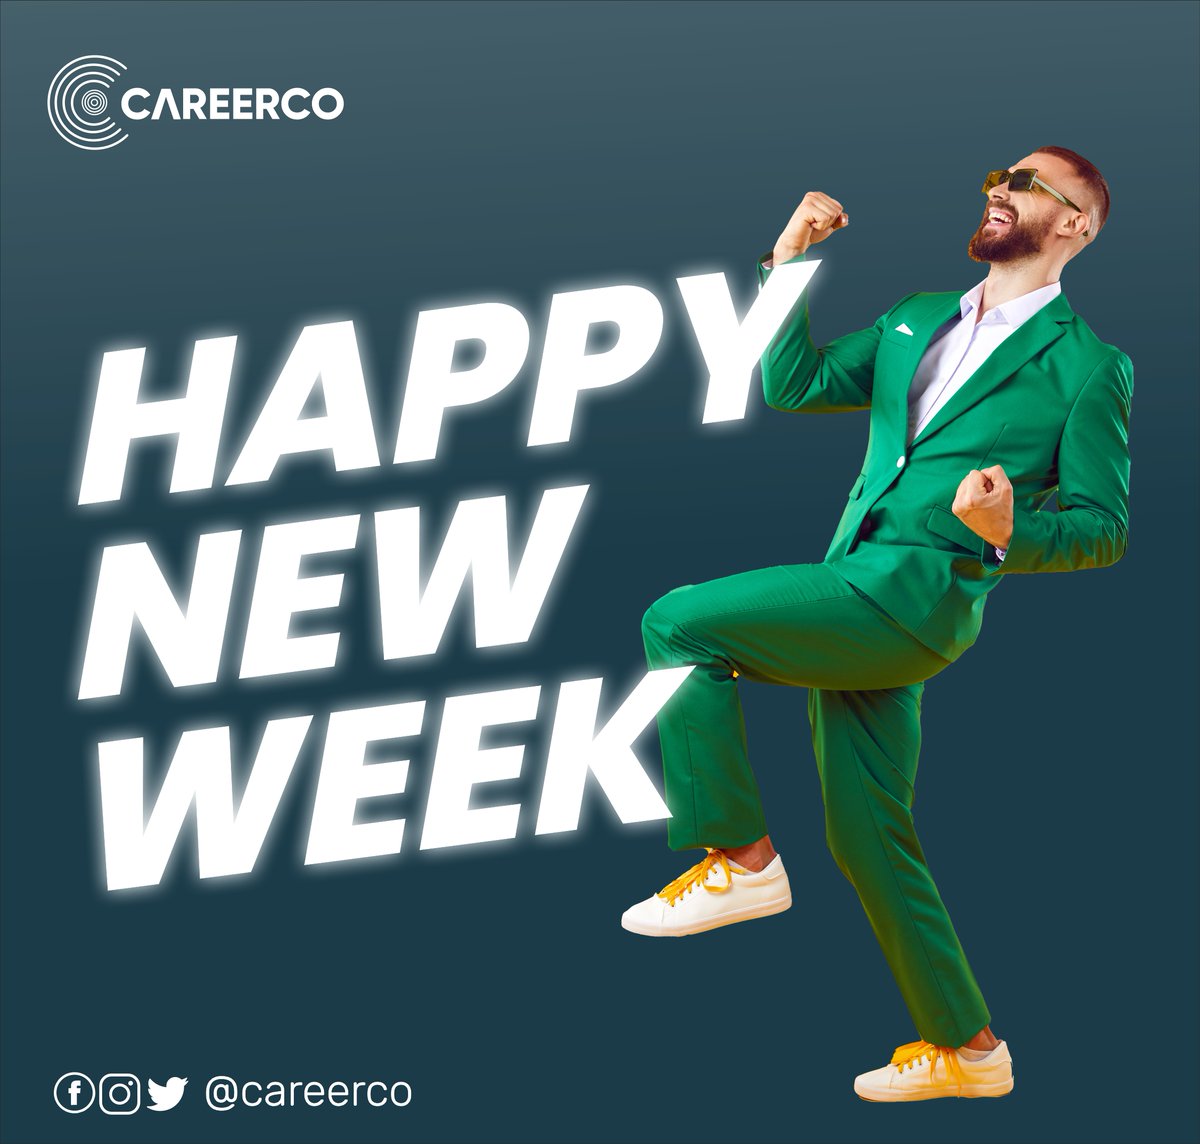 In your career journey, it's not about perfection but the strides you make. 

Celebrate every step forward and watch your success unfold.

Happy new week

#careercoach #careertpsdaily #careergrowthtips #careertips #careergoal #careersquotes